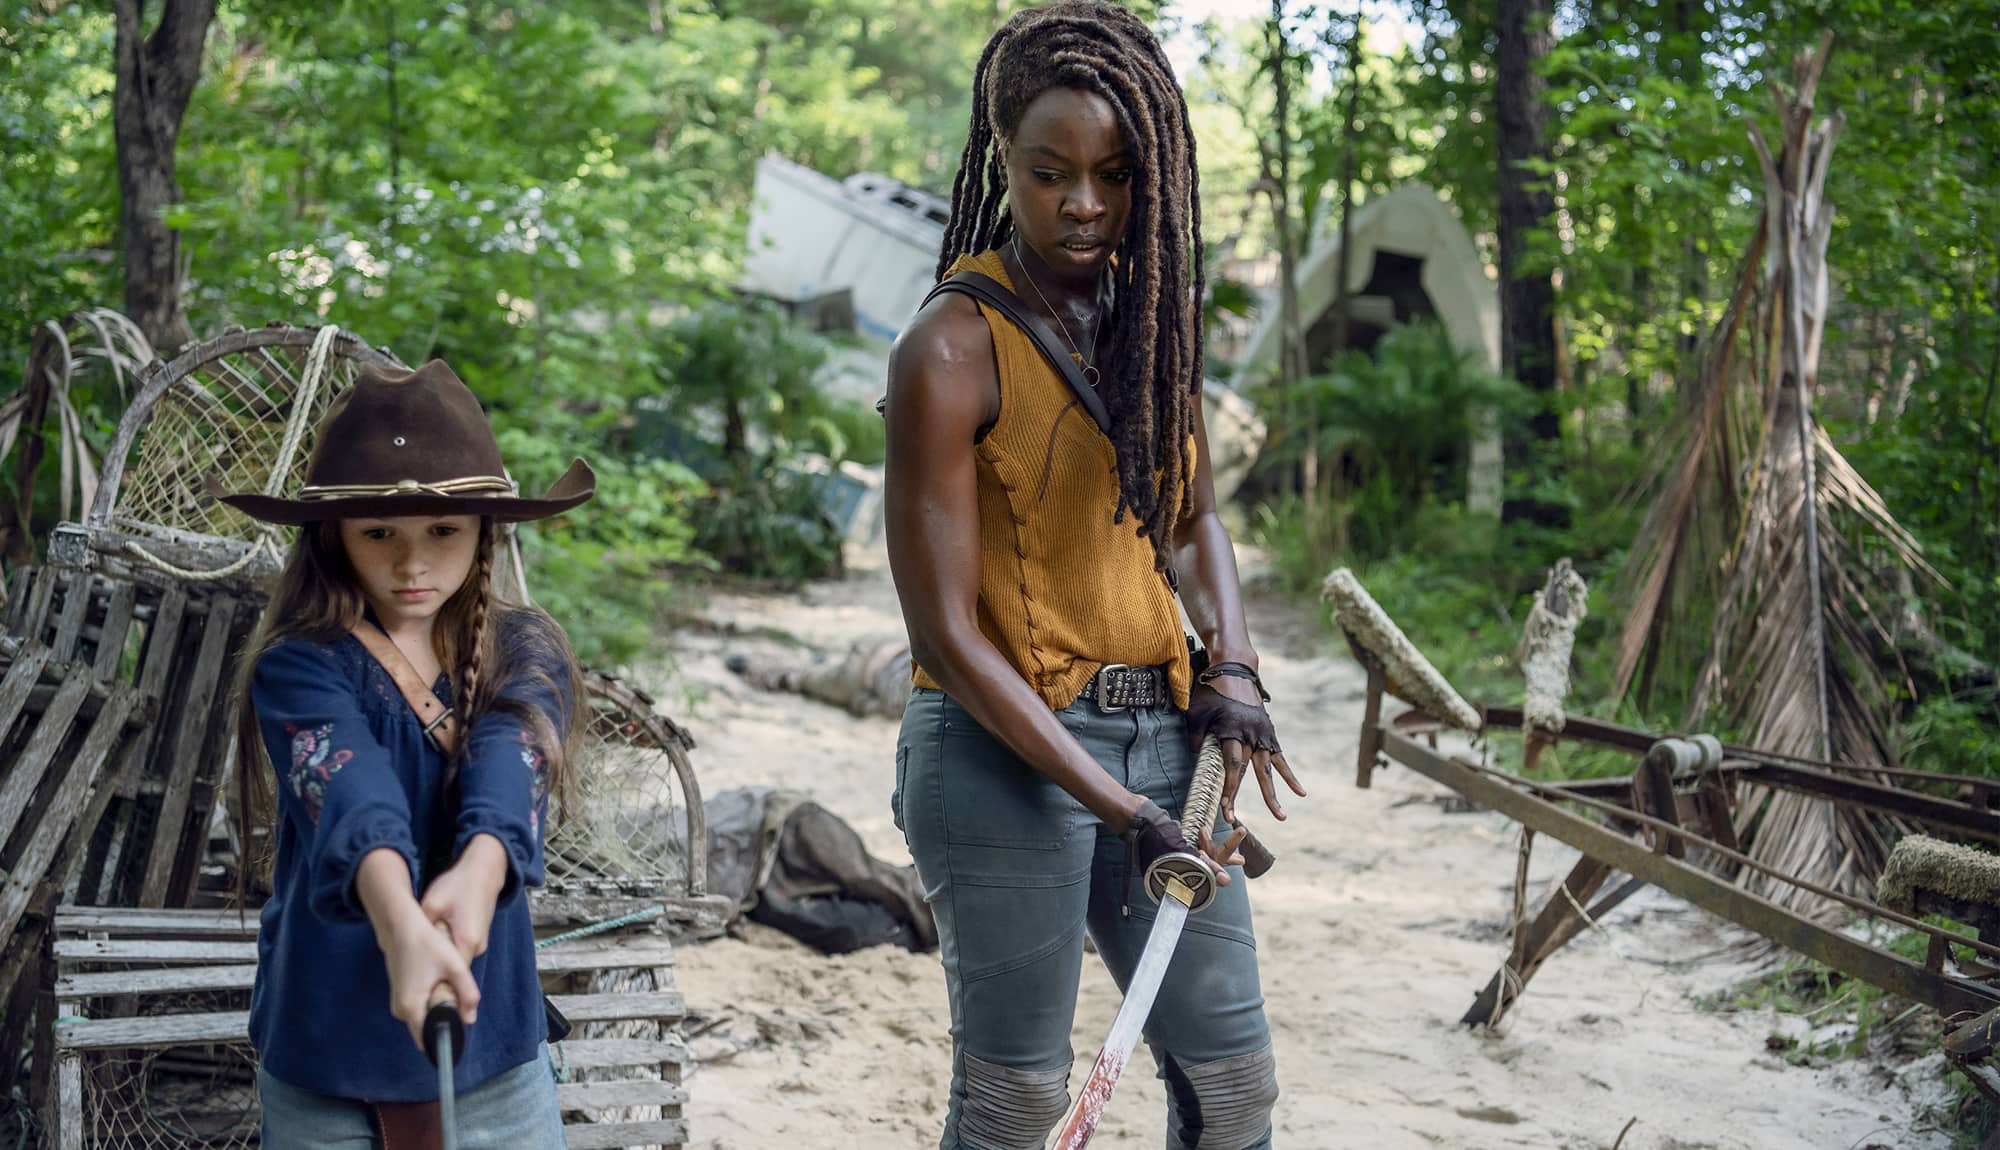 Danai Gurira Says Working With Cailey Fleming Has Been “Deeply Fulfilling”